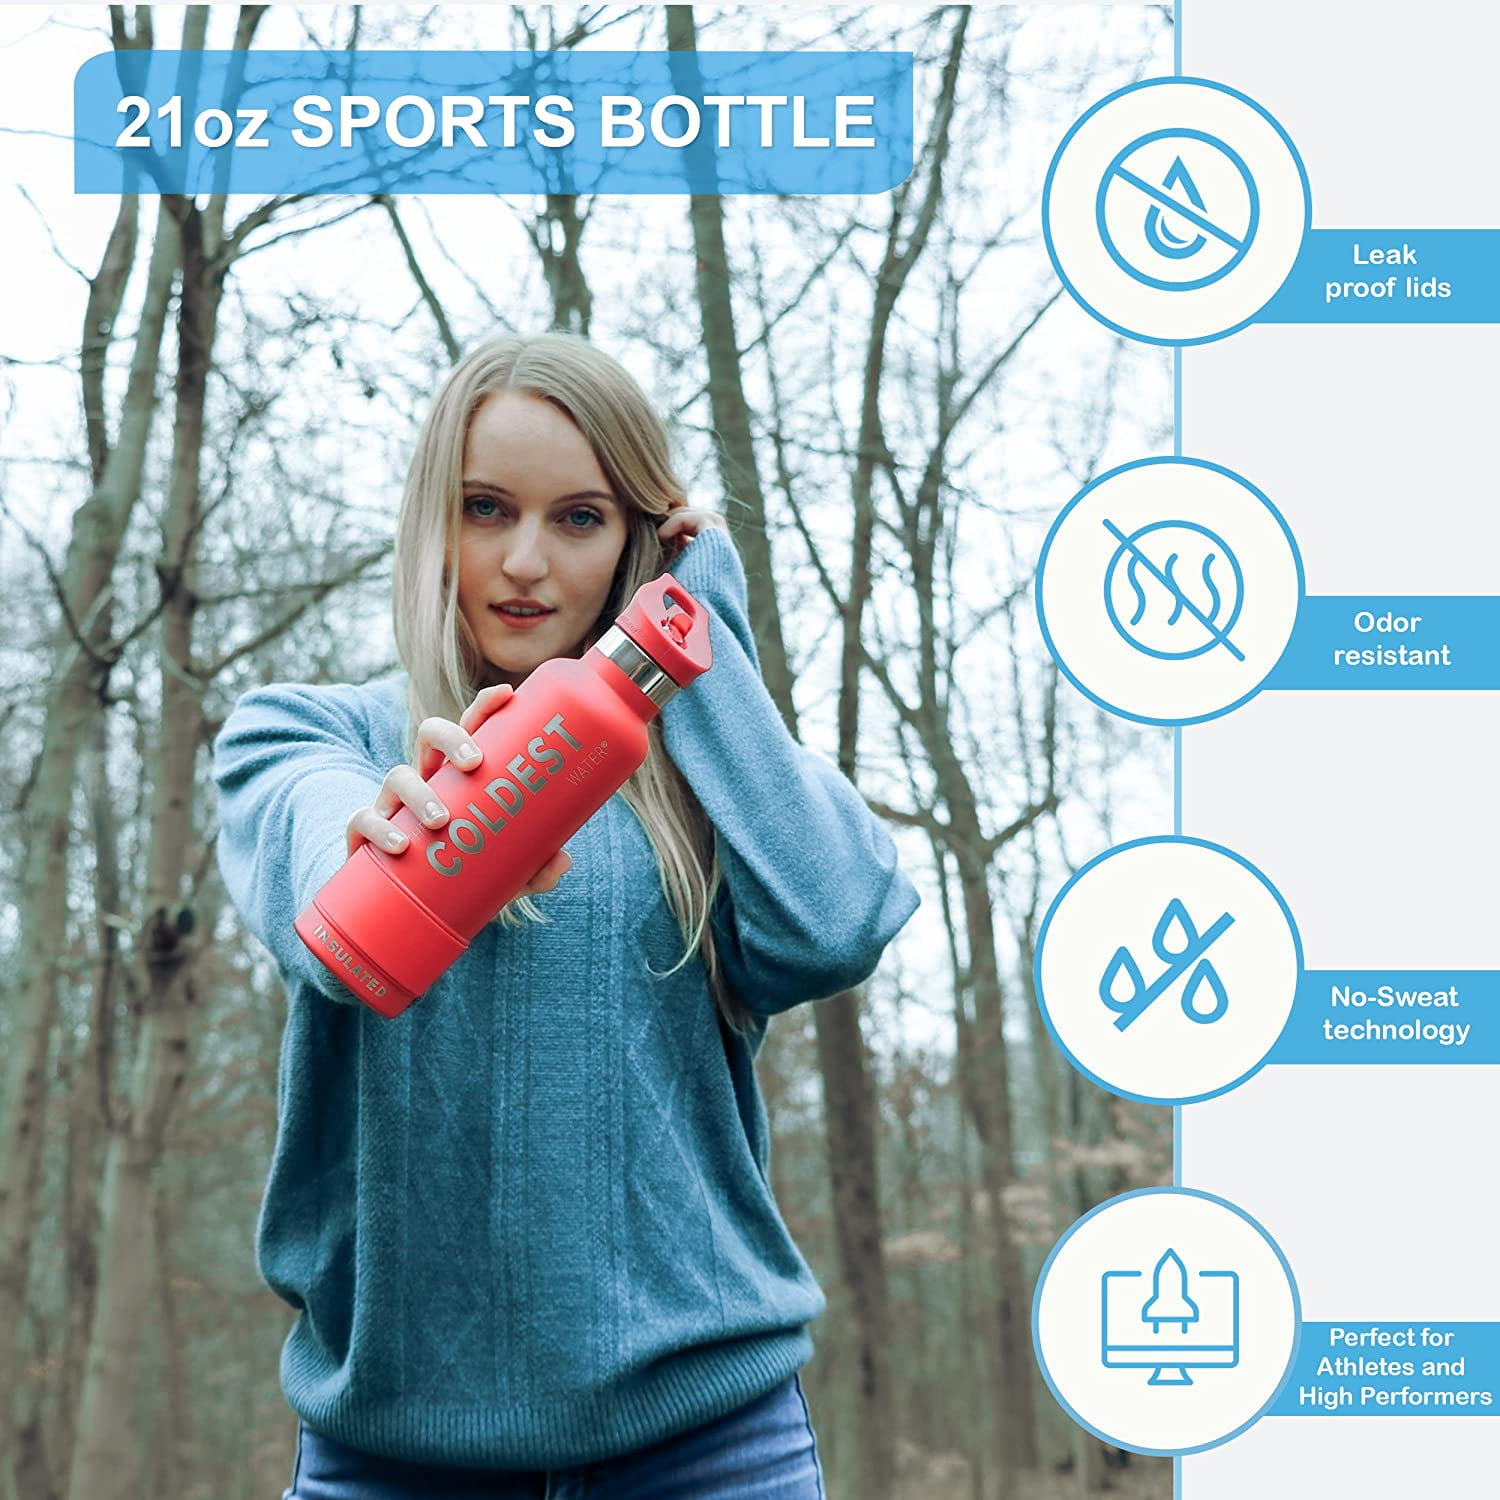 This $39 water bottle can hack your taste buds: Is it worth it